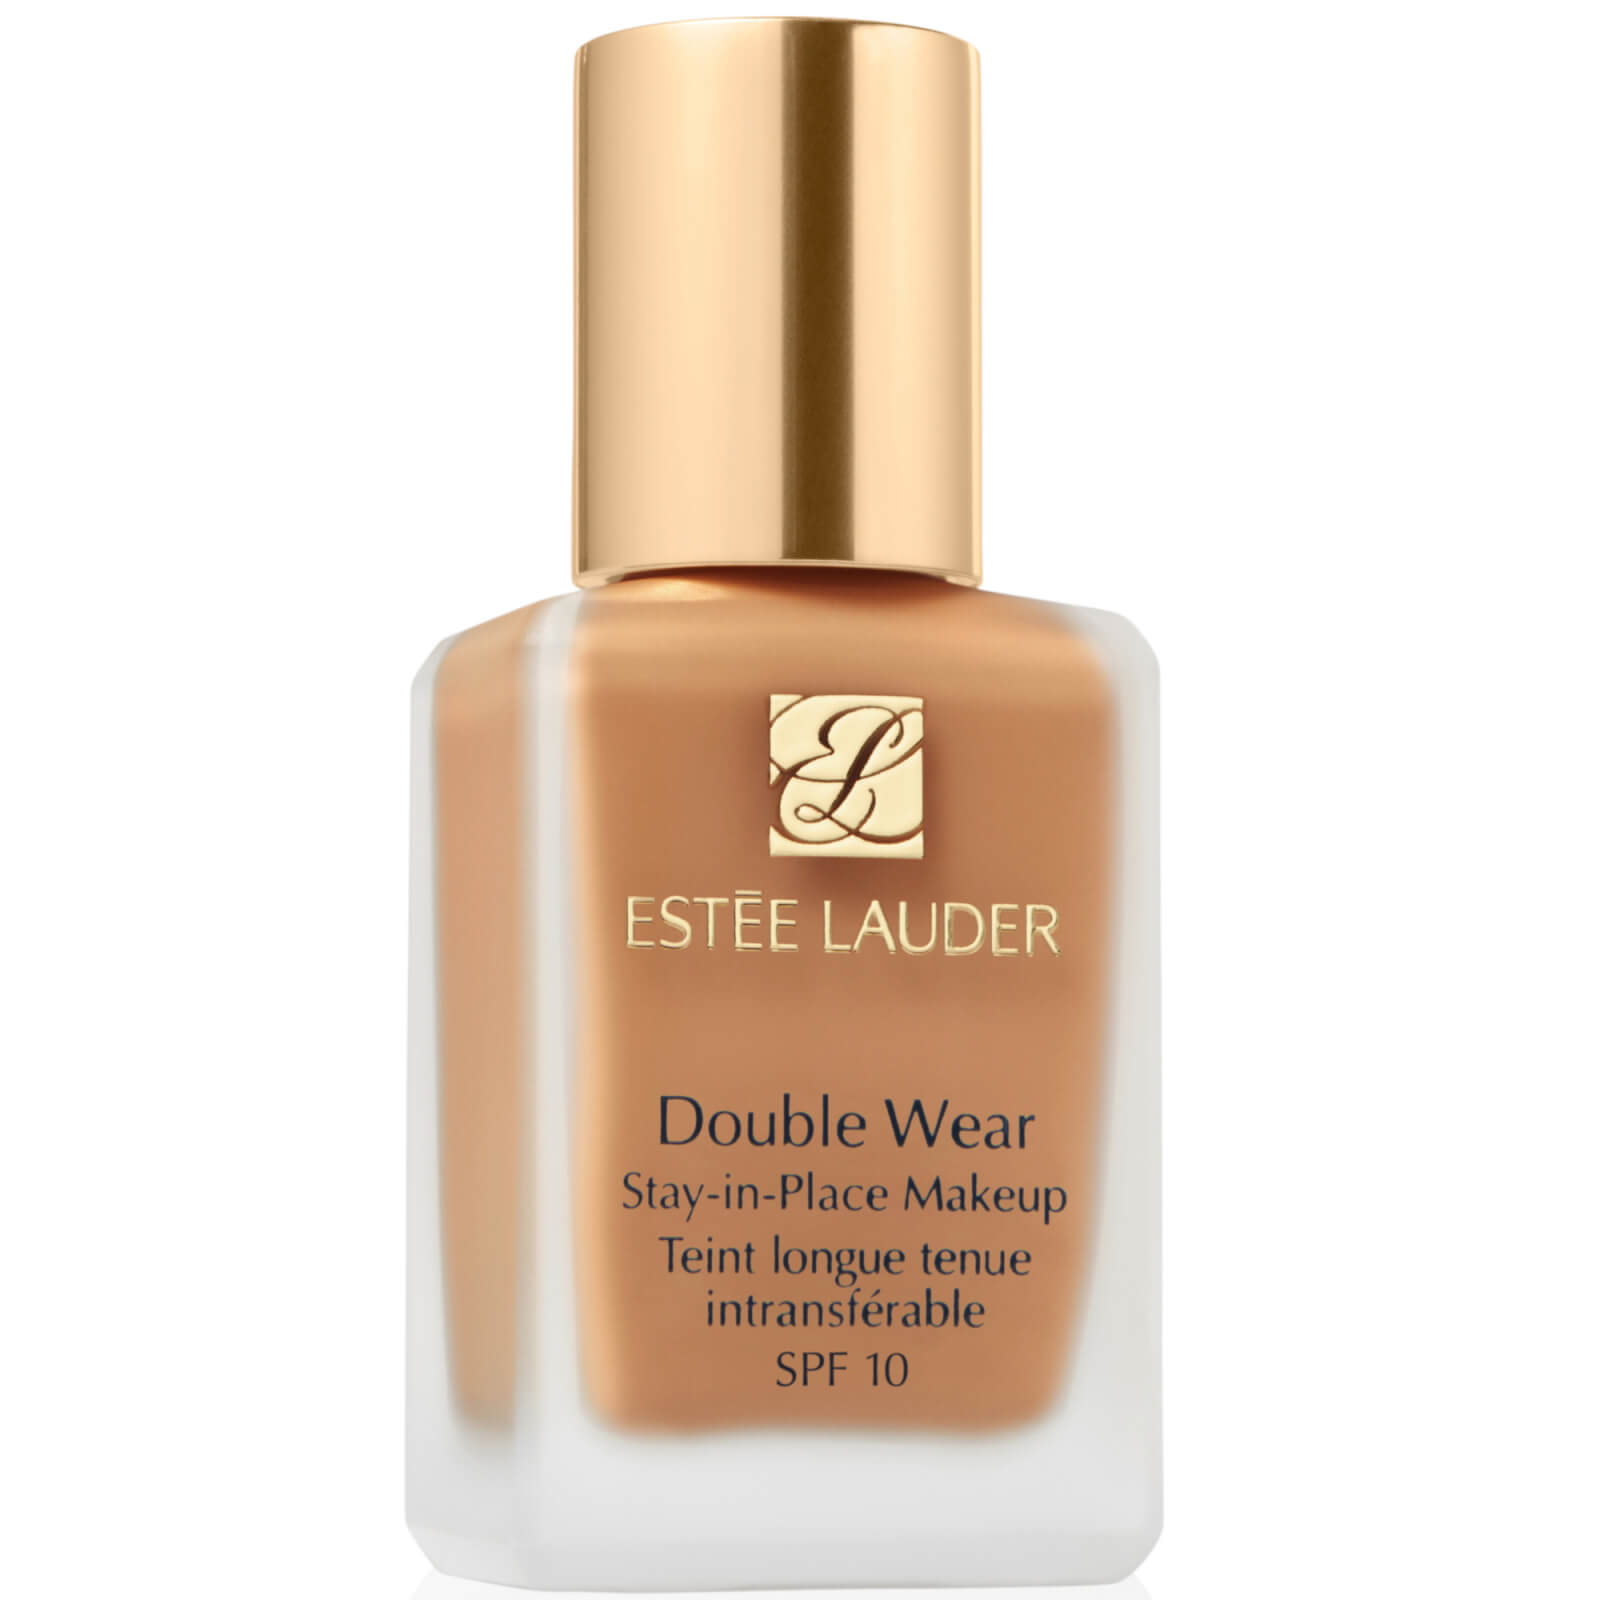 Estee Lauder Double Wear Stay-in-Place Makeup 30ml (Various Shades) - 3W2 Cashew